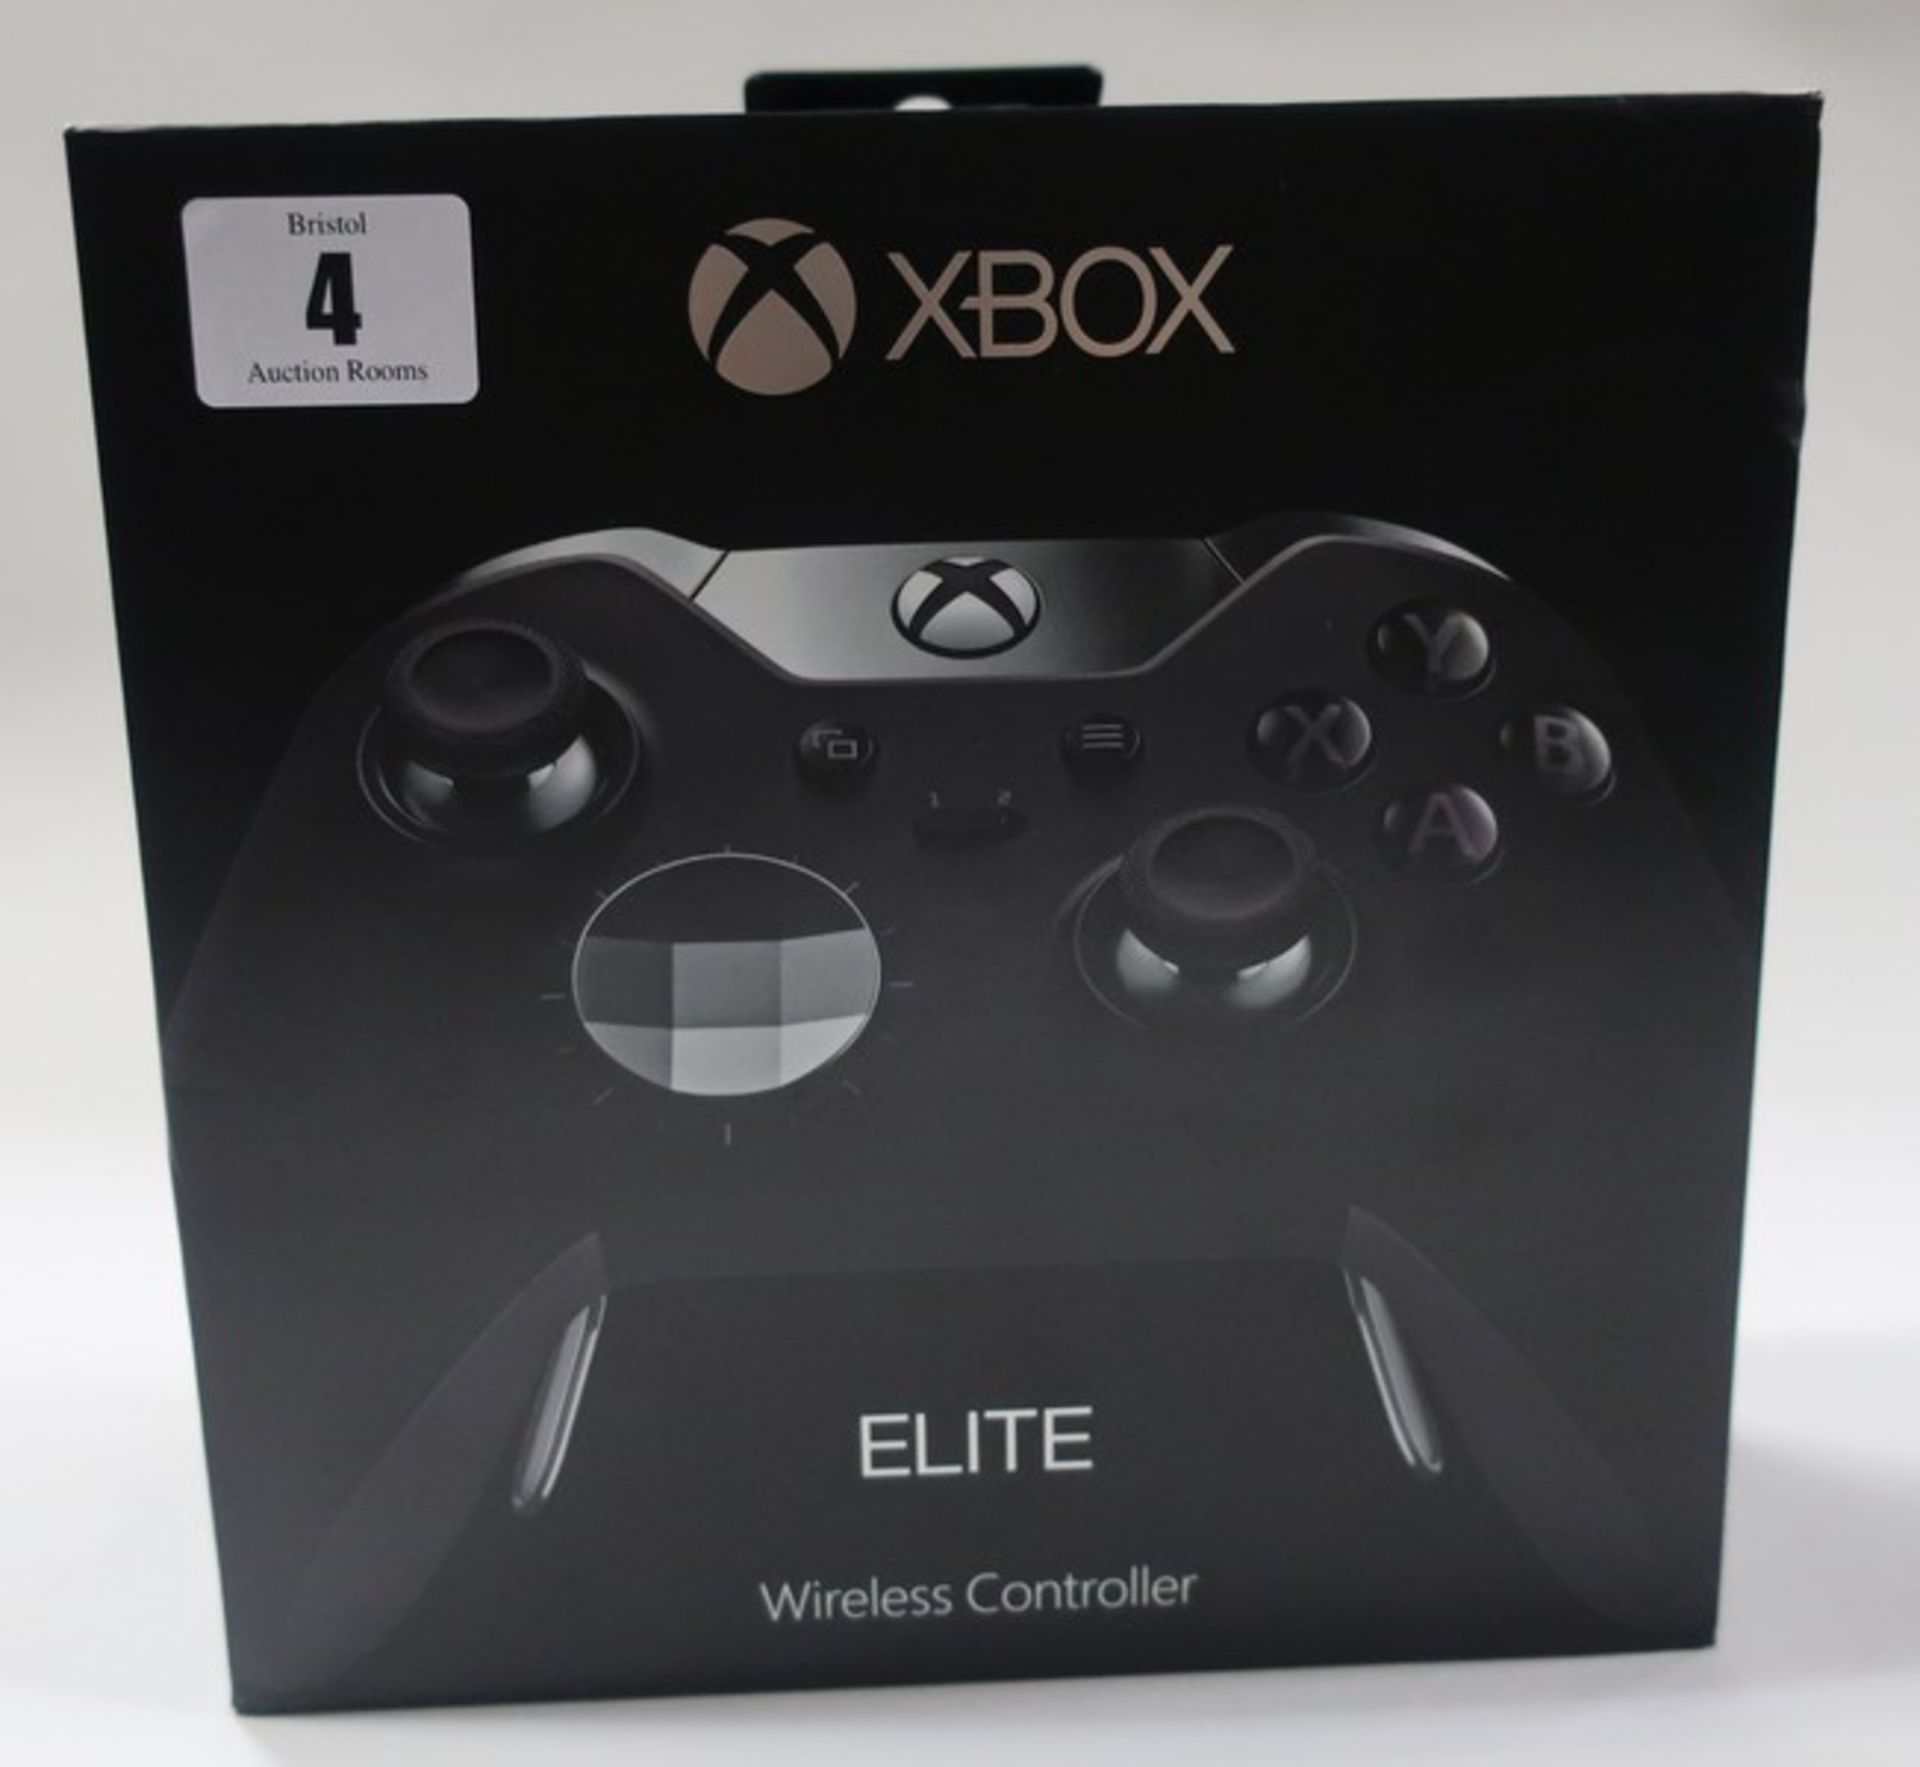 A boxed as new Xbox Elite wireless controller (Model No 1698).